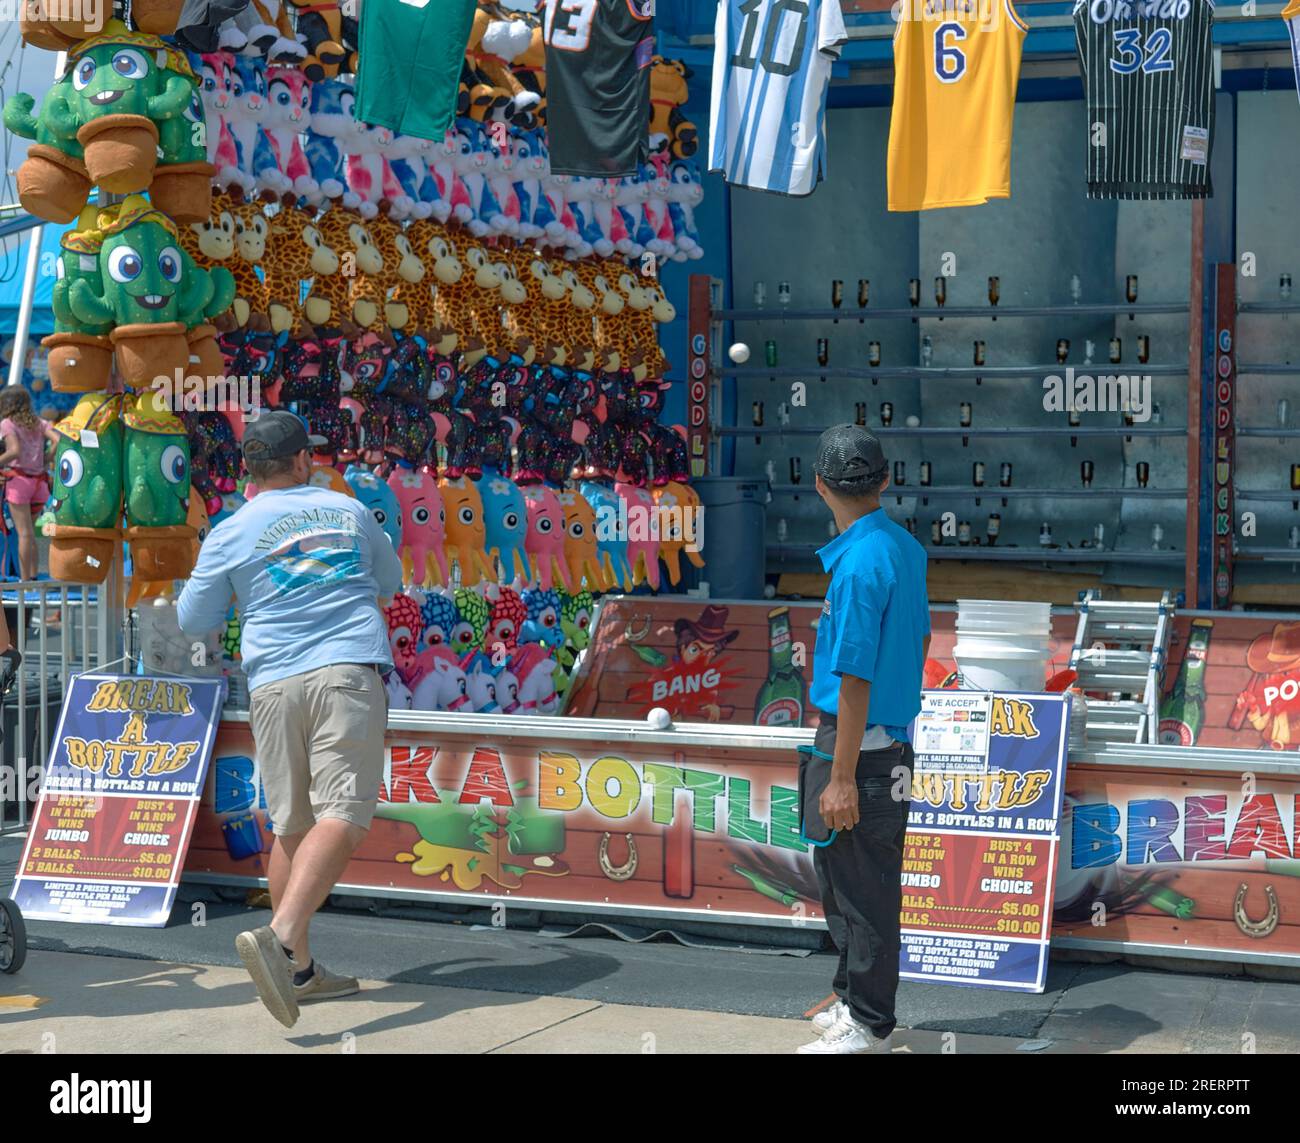 A man attempts to throw baseballs at bottles to win prizes on the midway at the 2023 Delaware State Fair, Harrington, Delaware USA. Stock Photo